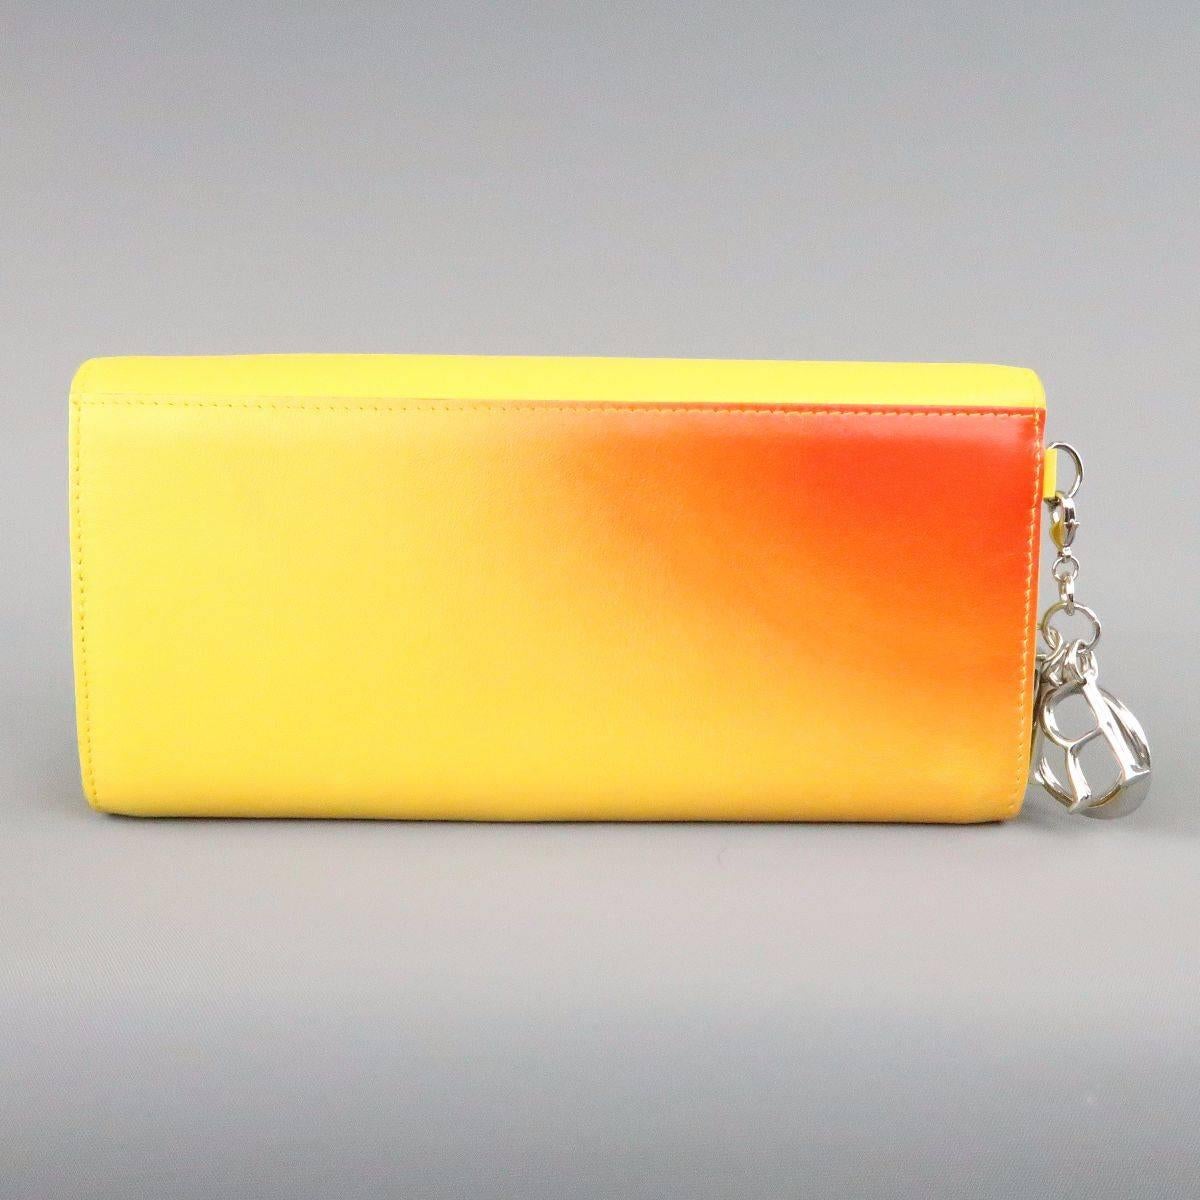 CHRISTIAN DIOR Yellow & Orange Gradient Leather Silver Charm Wallet 2